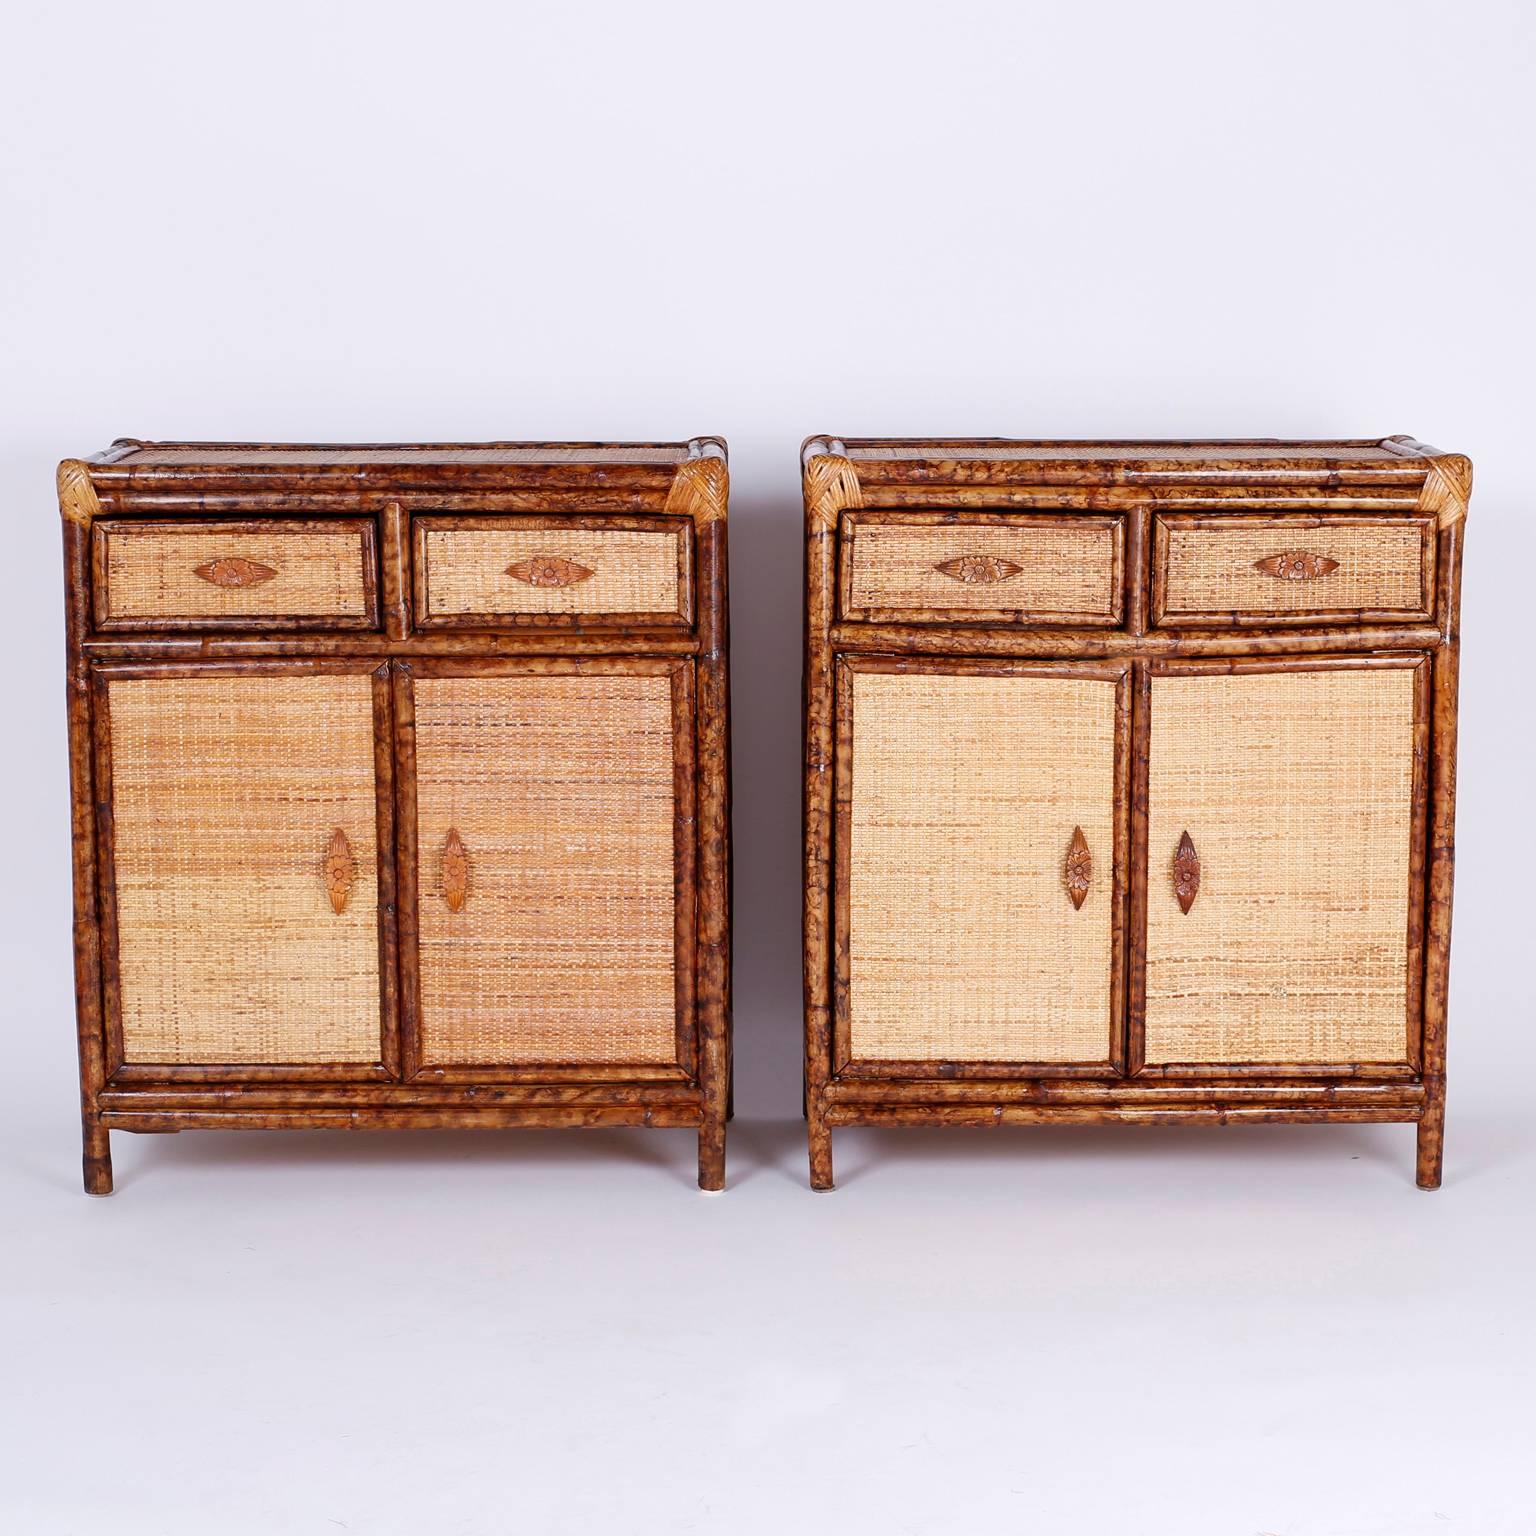 Stand out pair of cabinets or stands with two drawers and two doors with carved wood floral handles. Featuring a custom faux bamboo finish, wrapped corners, and soothing organic colors and textures.